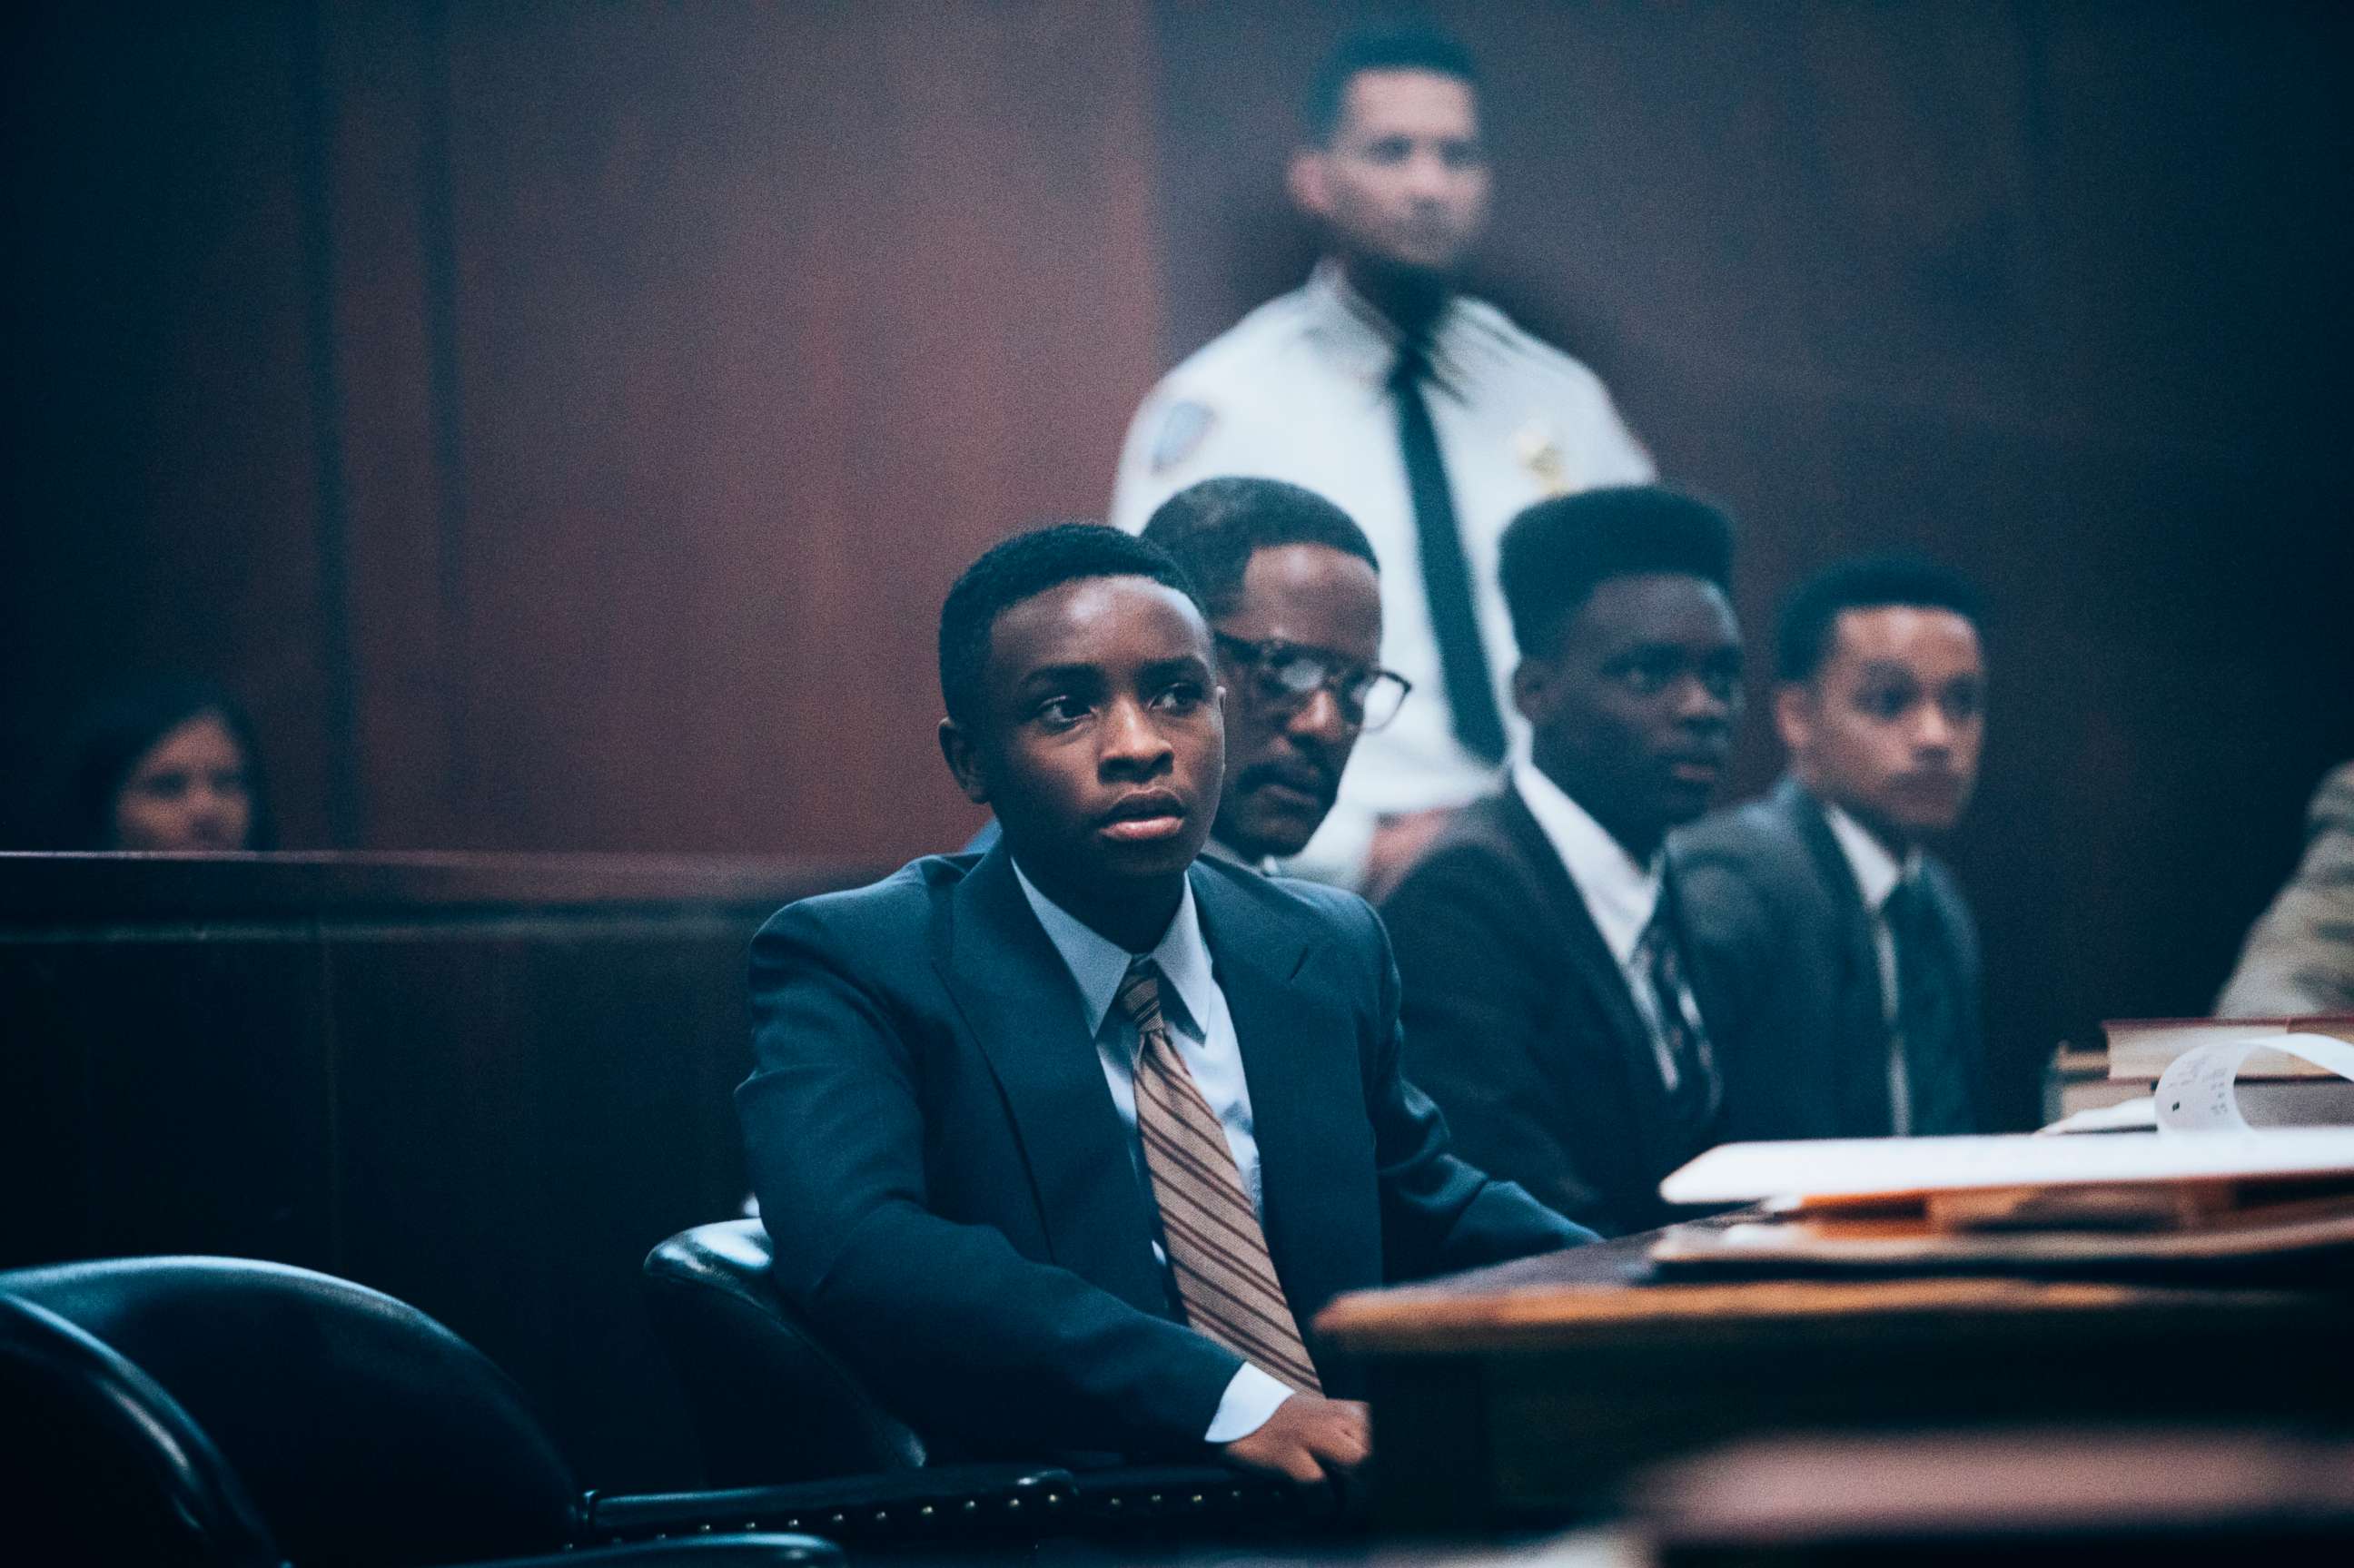 PHOTO: Caleel Harris, as Young Antron McCray, Blair Underwood, as Bobby Burns, Ethan Herisse, as Young Yusef Salaam, and Marquis Rodriguez, as Young Raymond Santana, in a scene from "When They See Us."